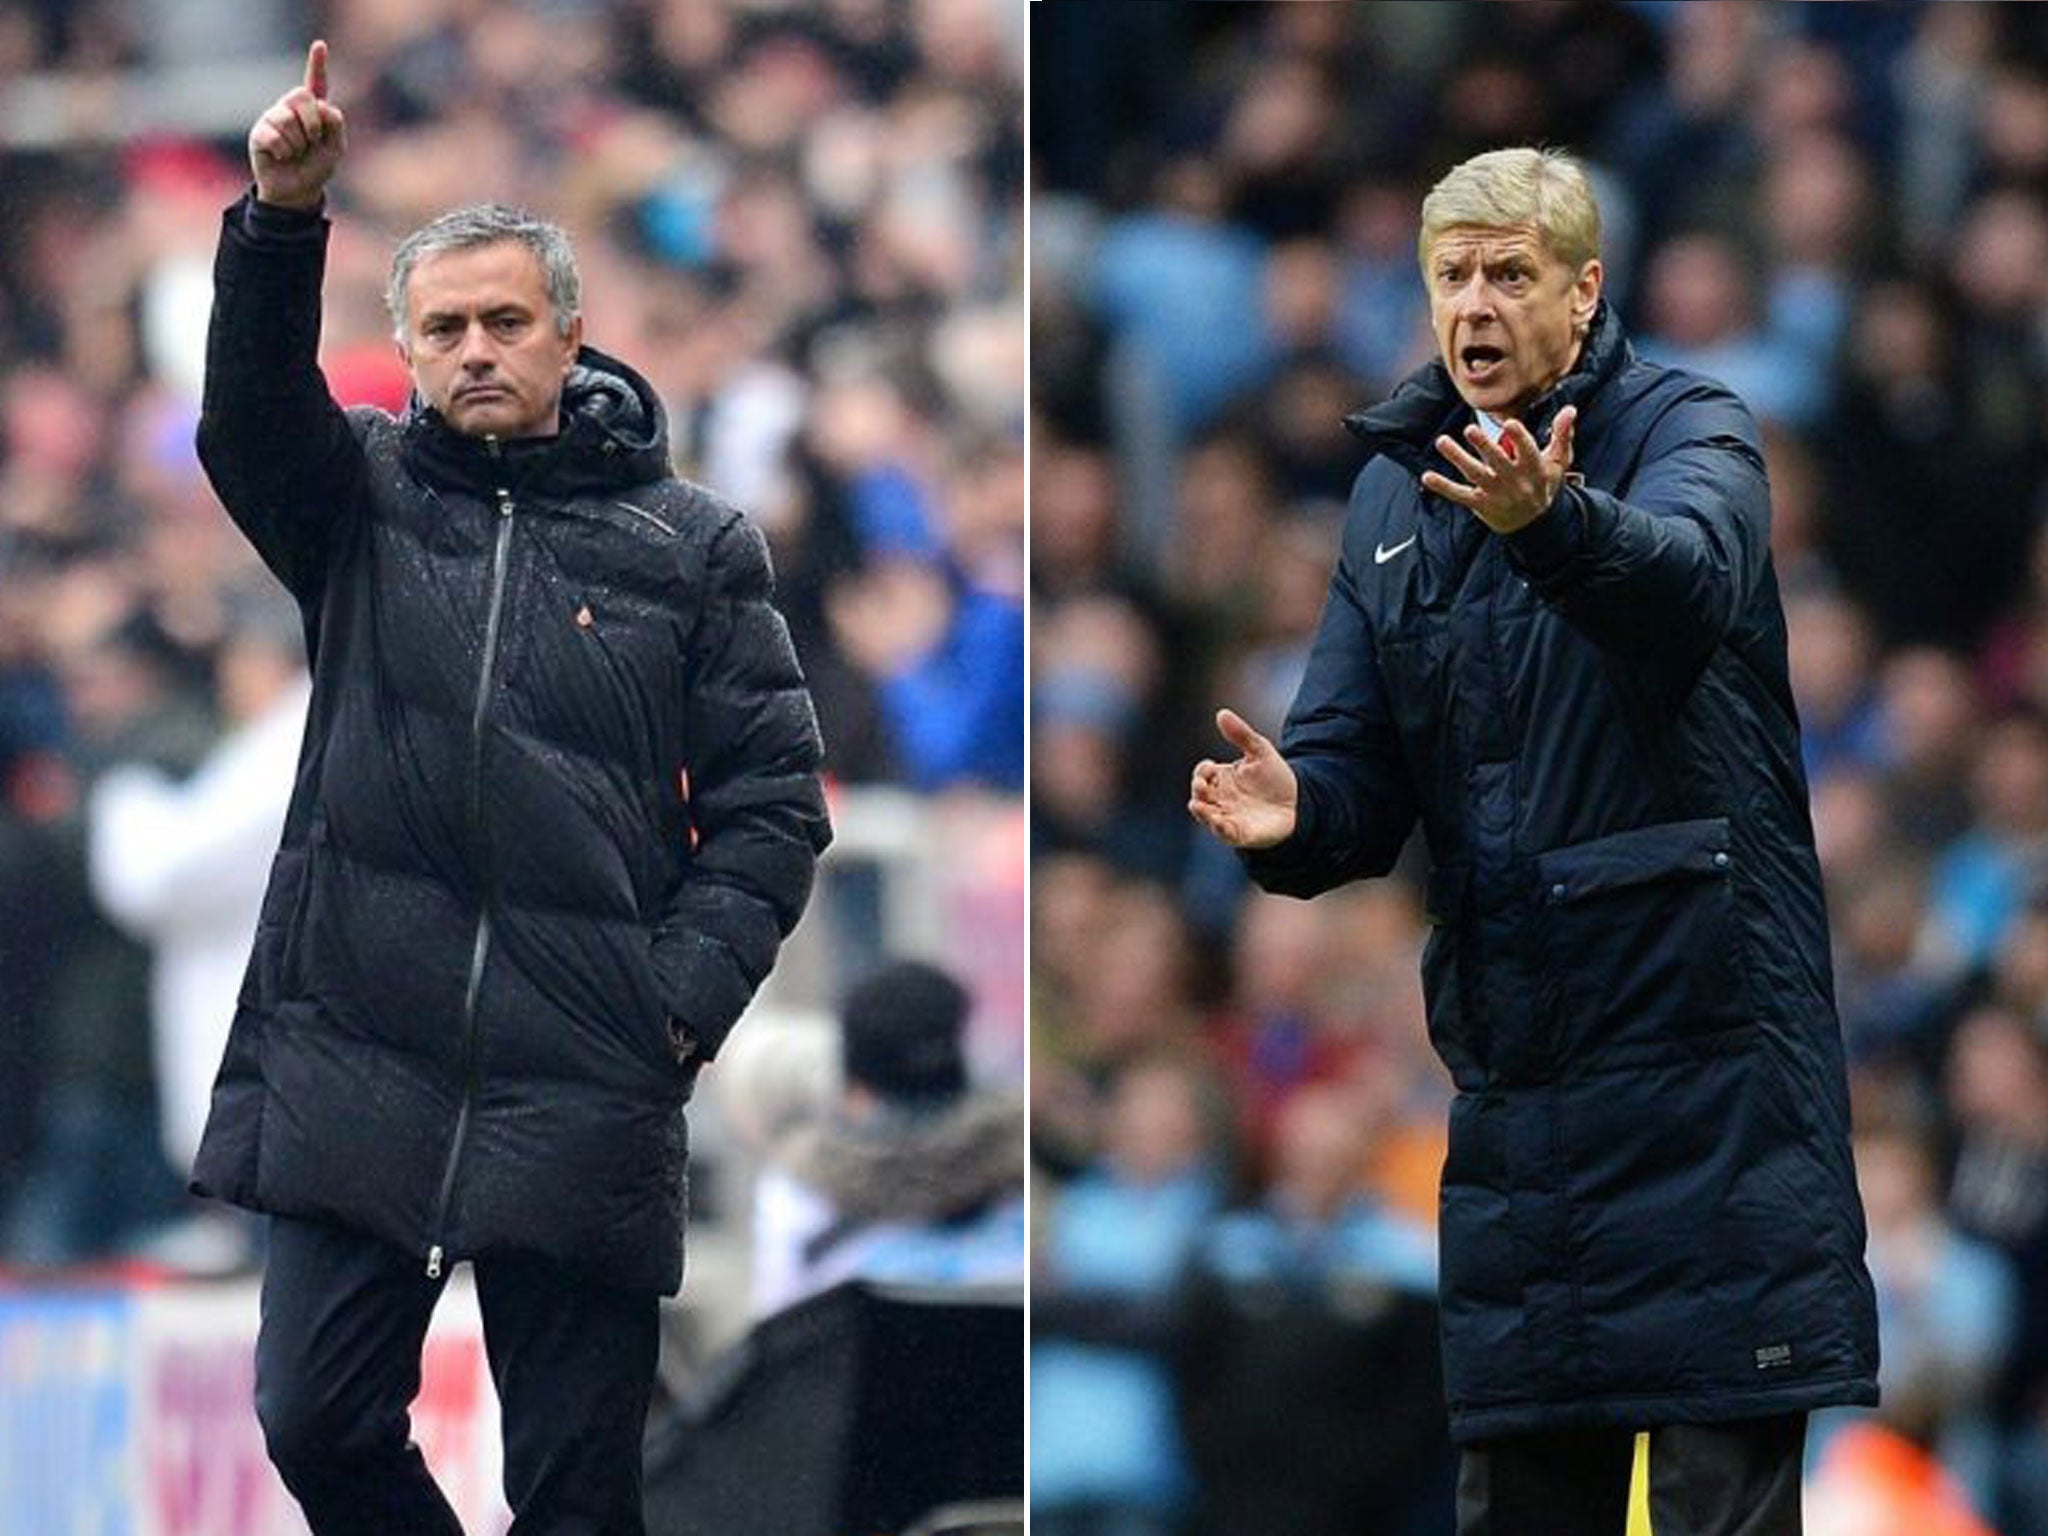 Mourinho is one of very few managers to enjoy a superior record against the Arsenal boss, having never lost to Wenger